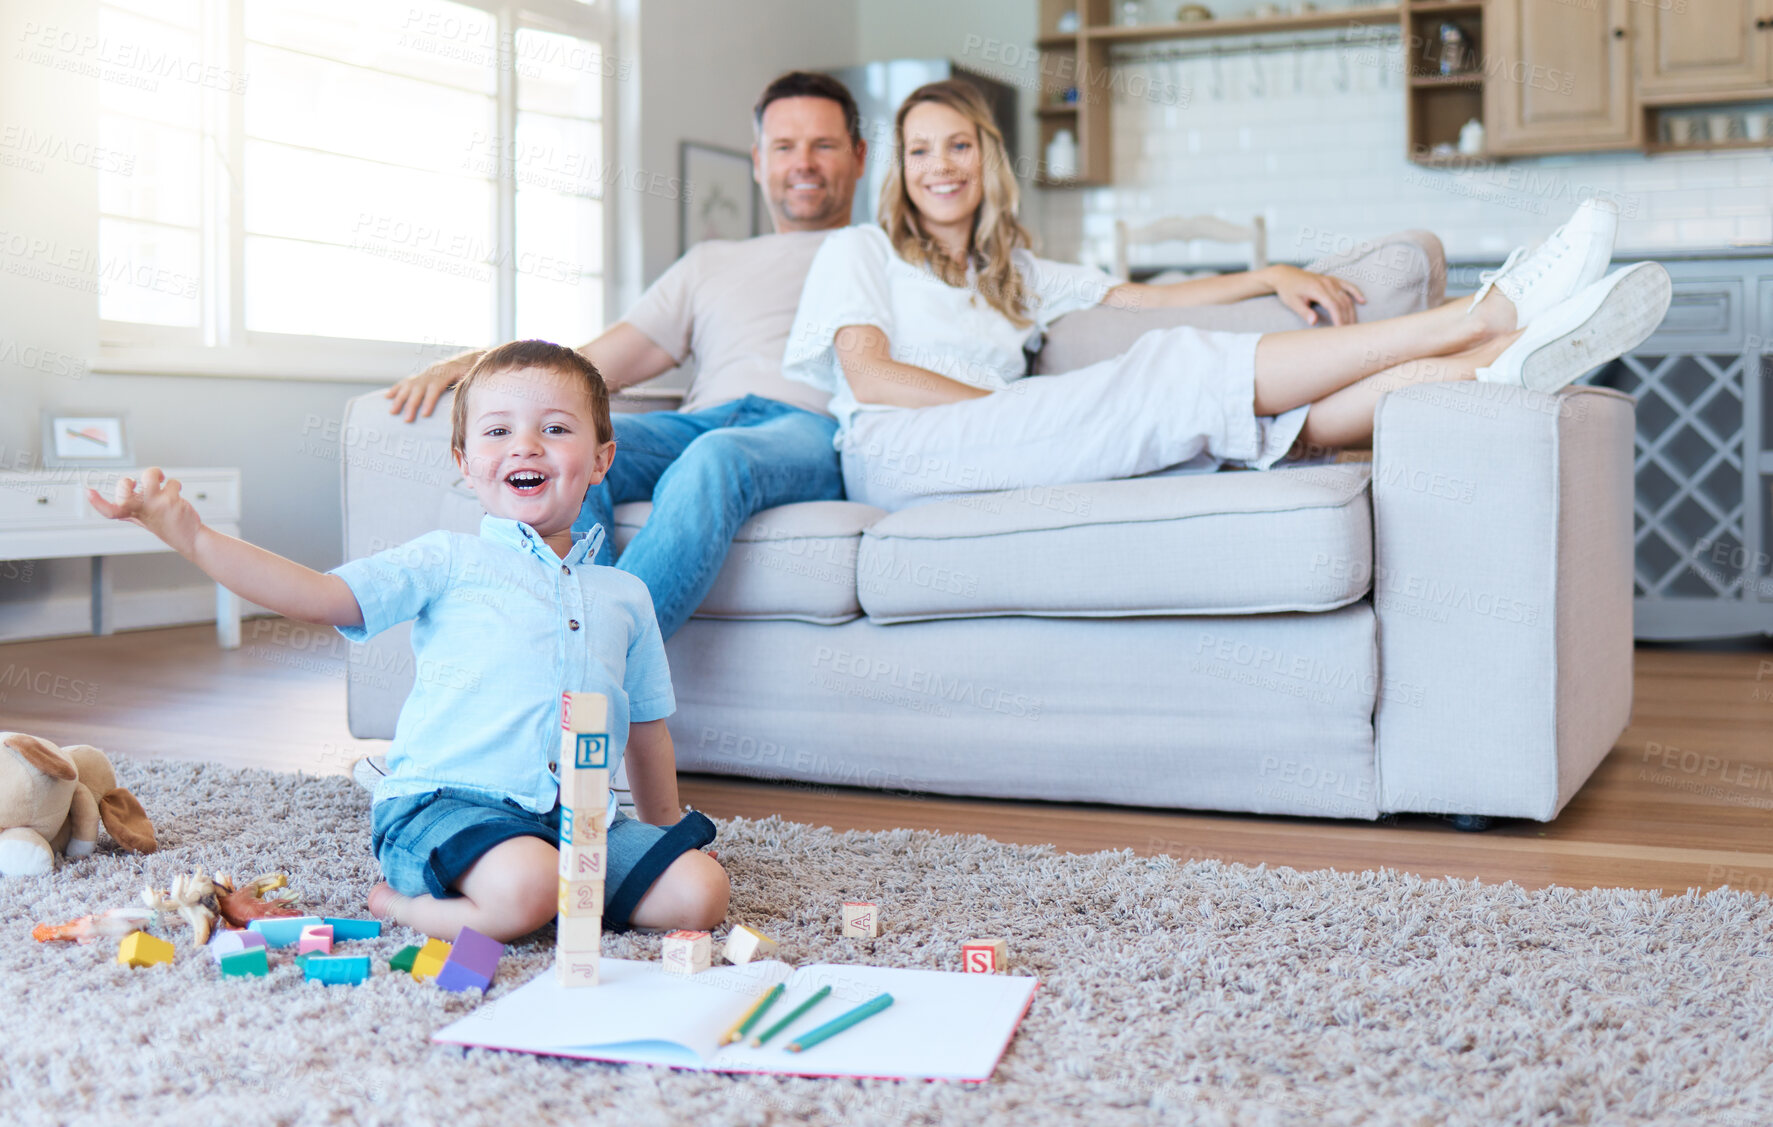 Buy stock photo Shot of a boy playing with his toys while his parents sit on the couch at home